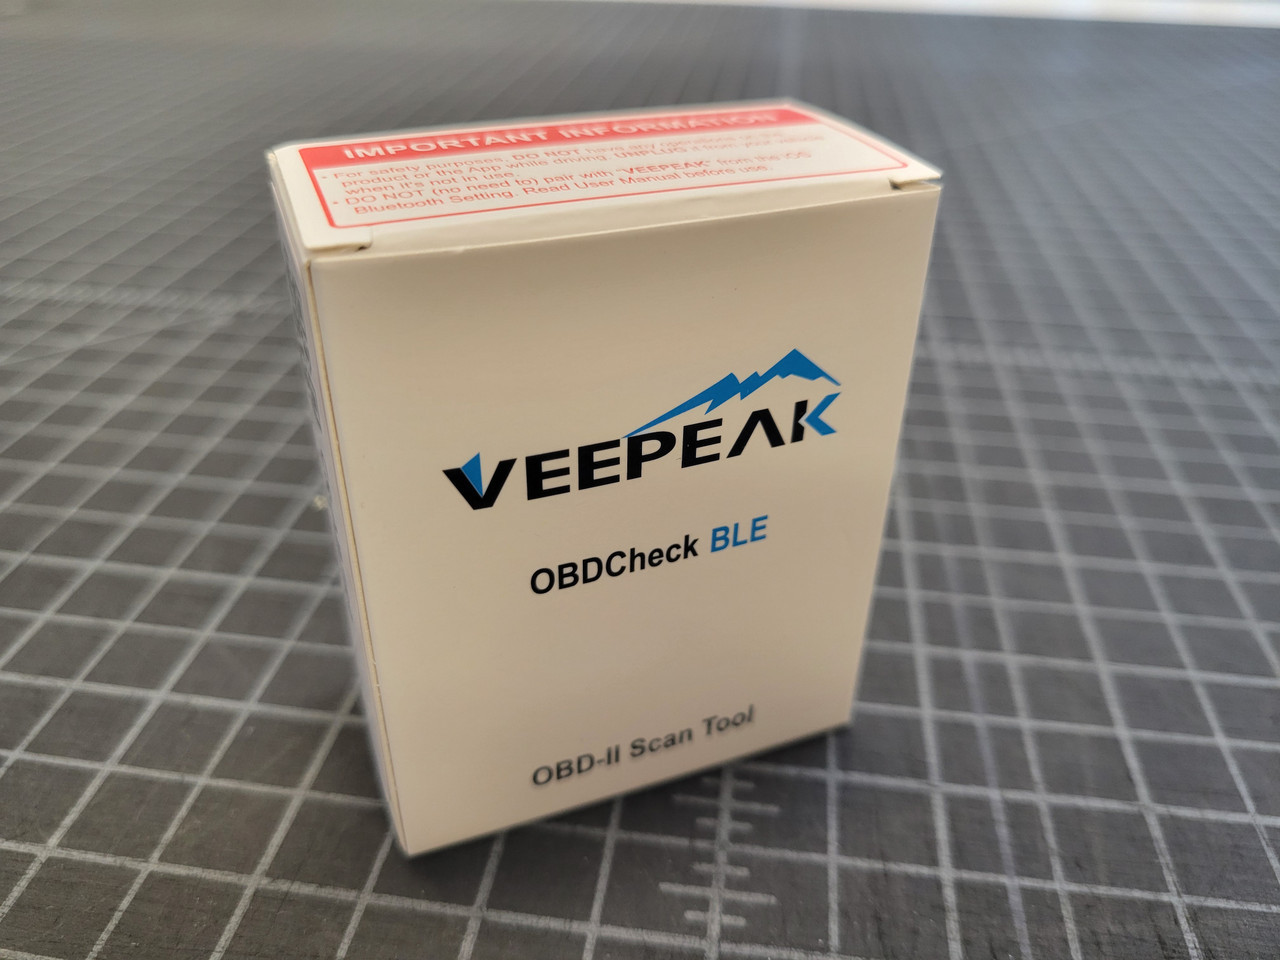 VeePeak Bluetooth OBDII Diagnostic Tool in the box standing